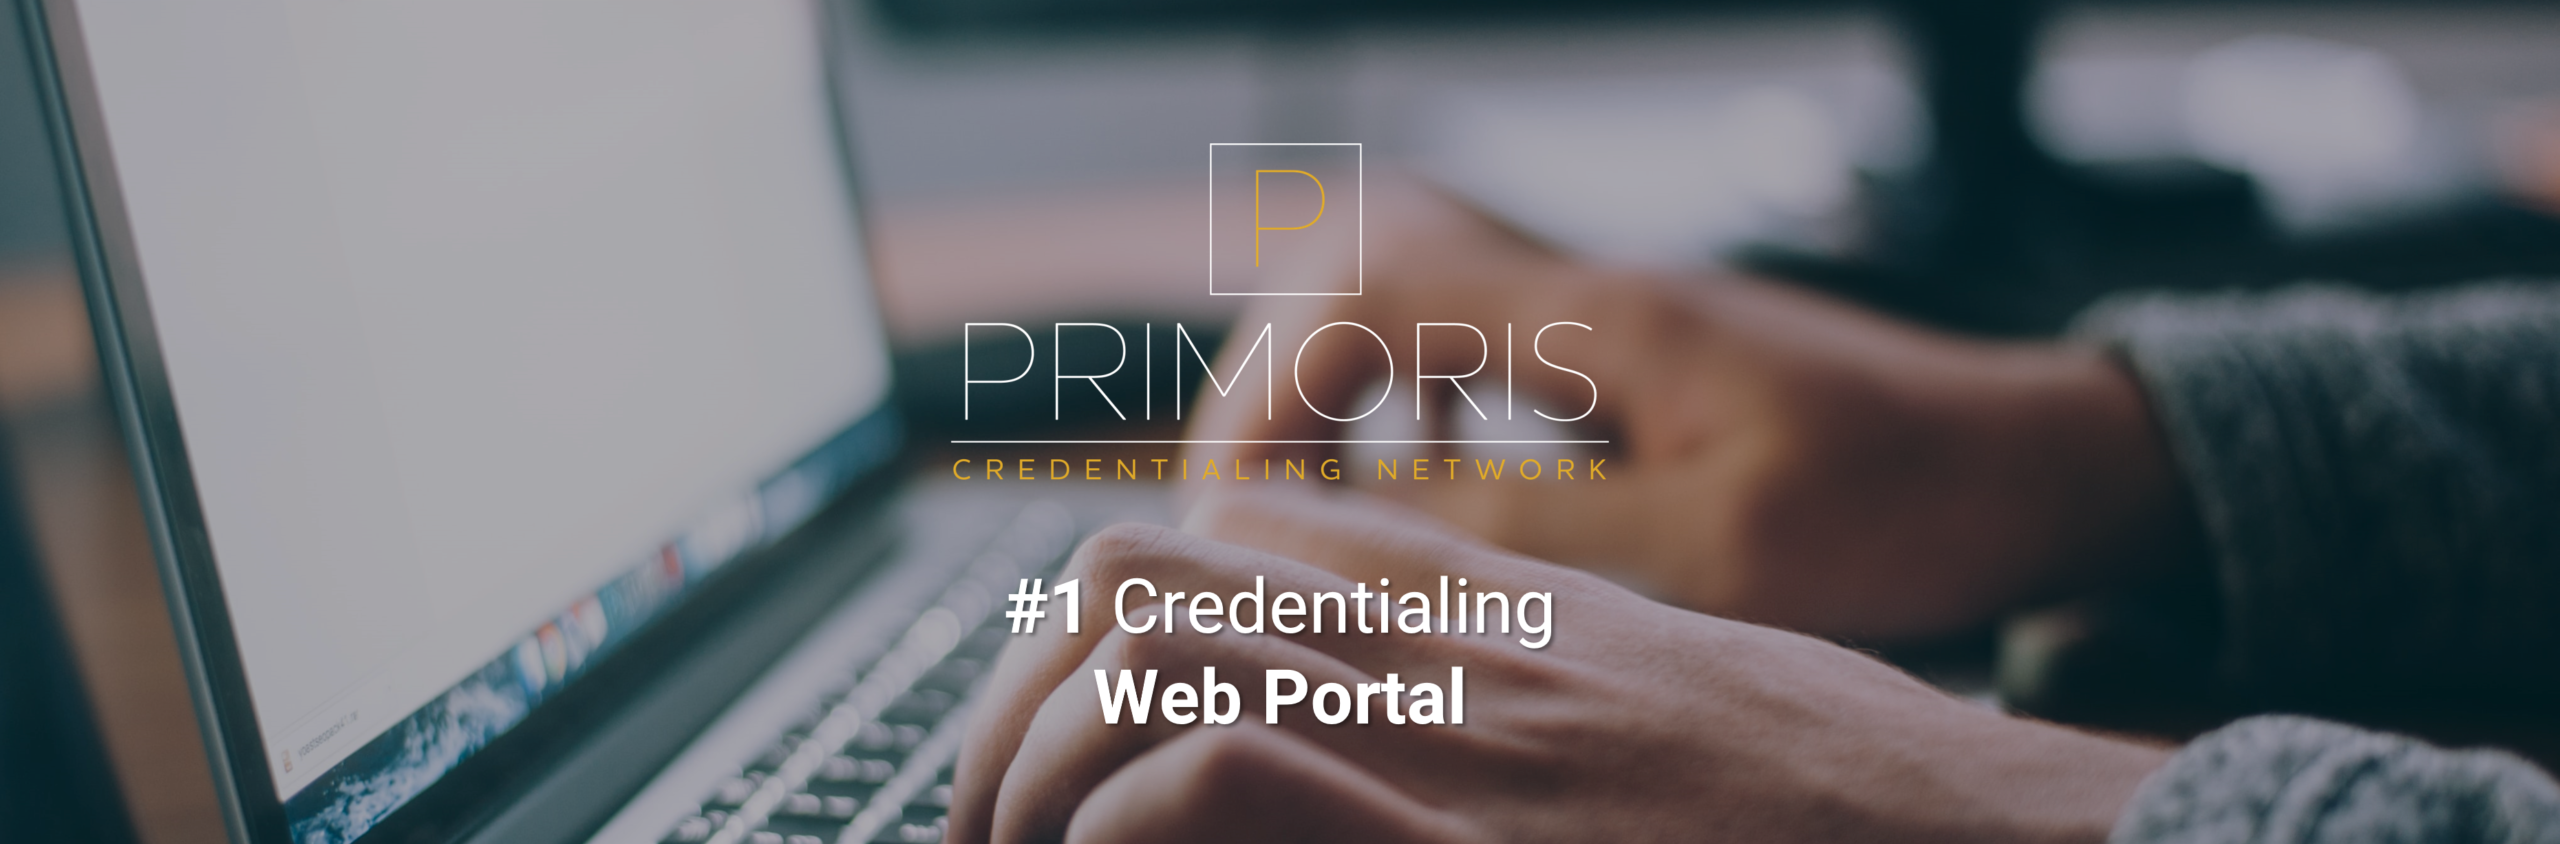 Credentialing Web Portal with Primoris